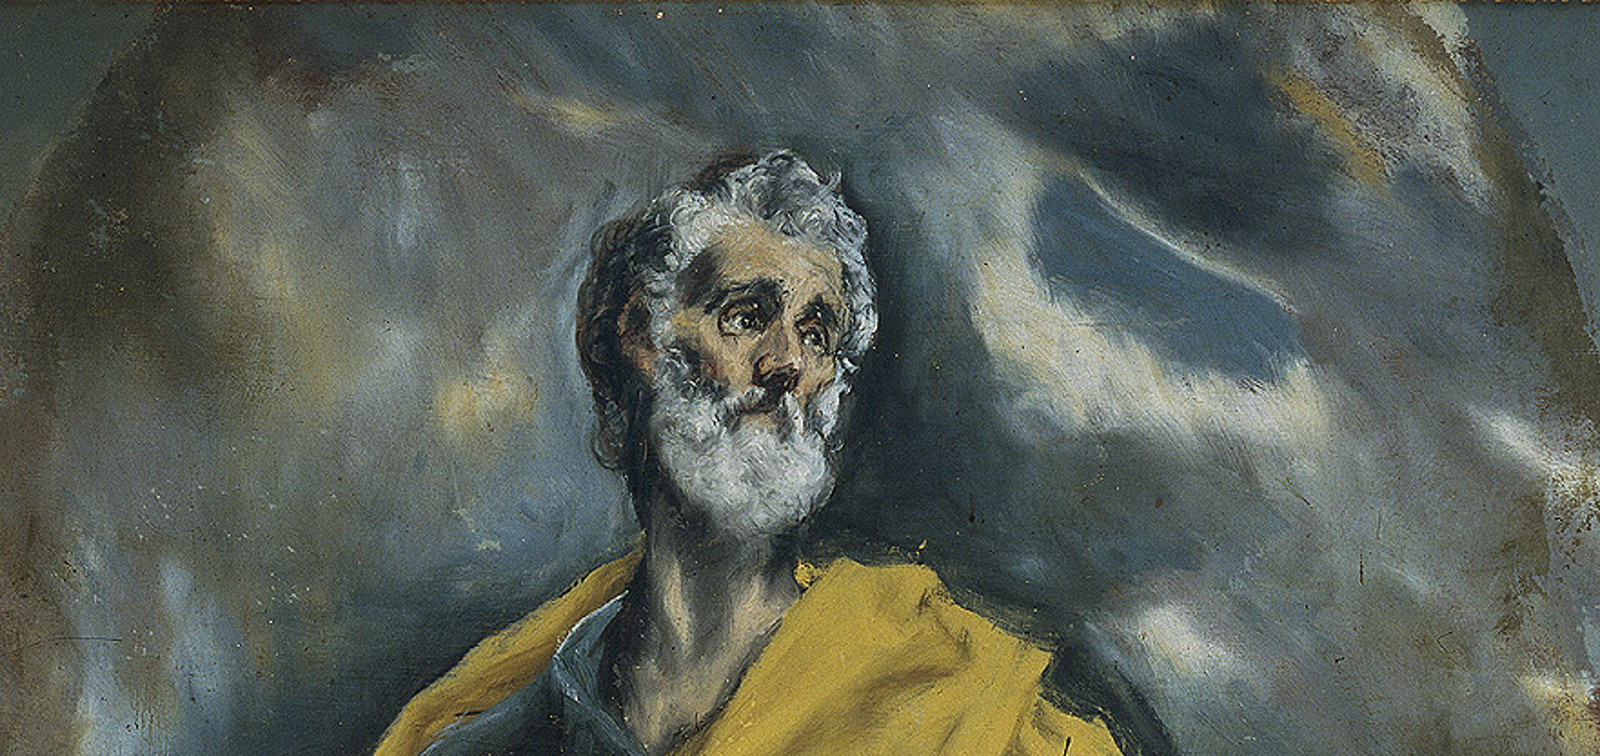 El Greco and the Oballe Chapel